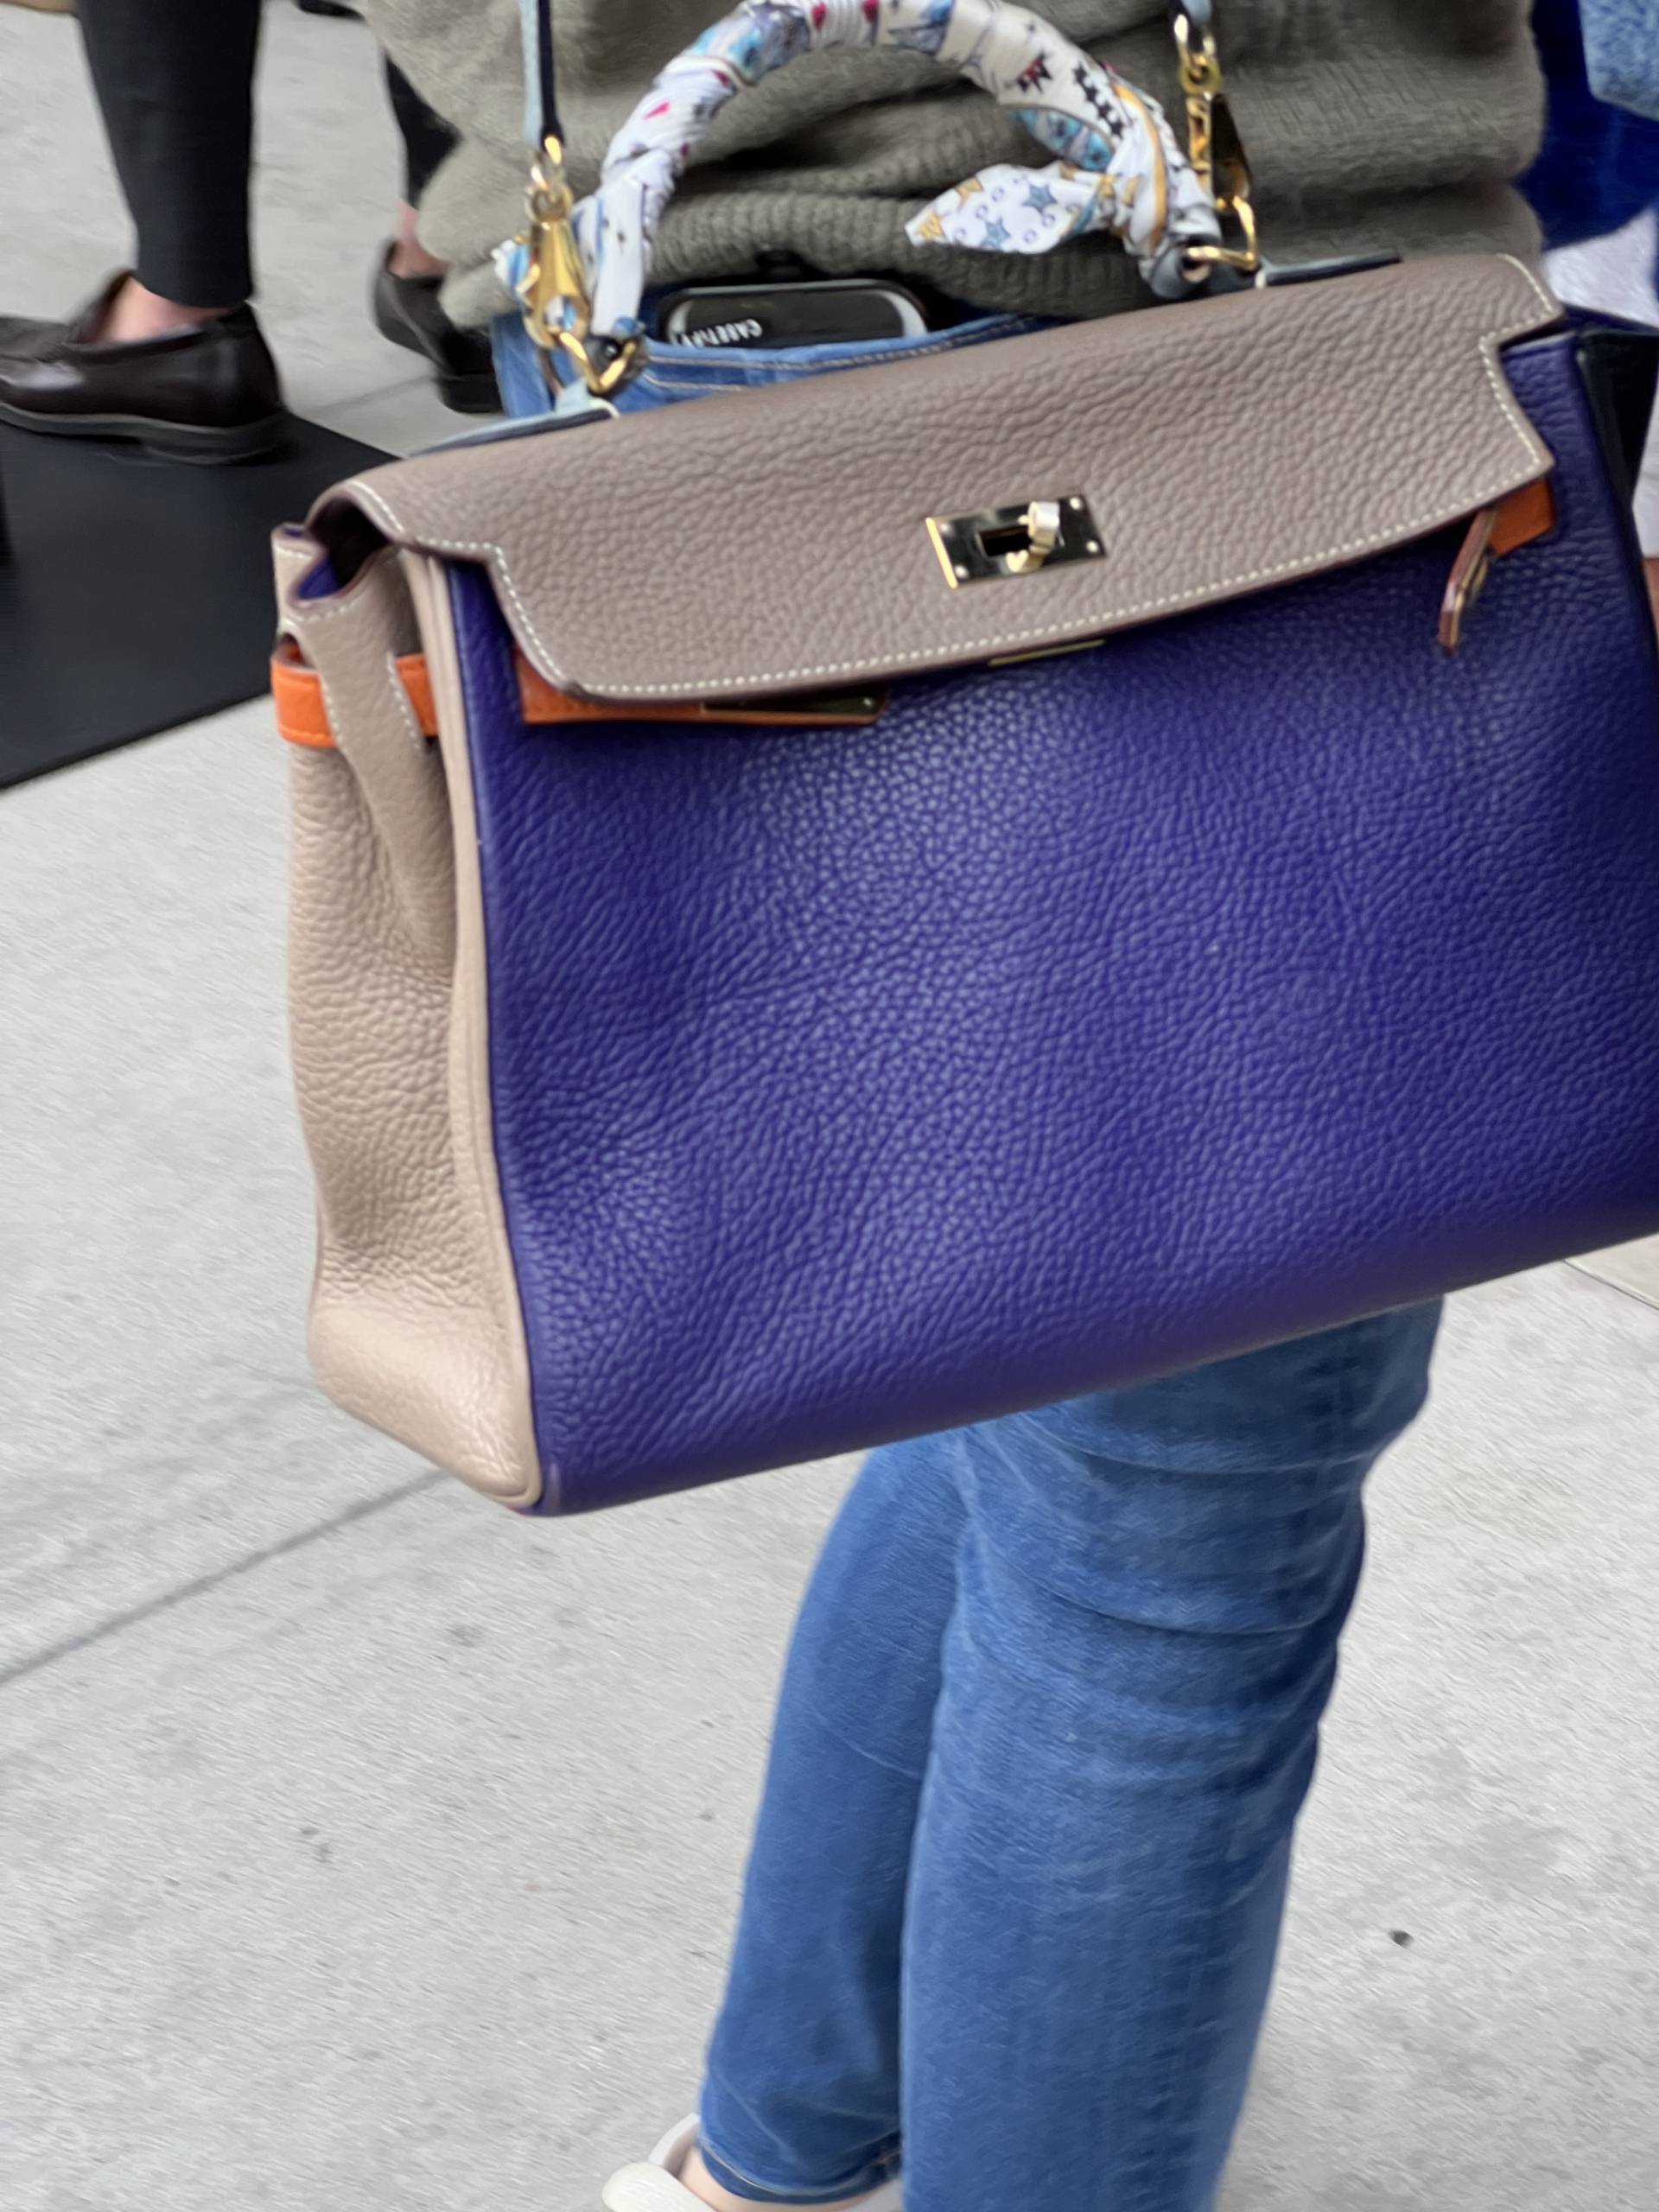 Hermès Kellys We Rodeo - Drive in PurseBop Action Spotted on